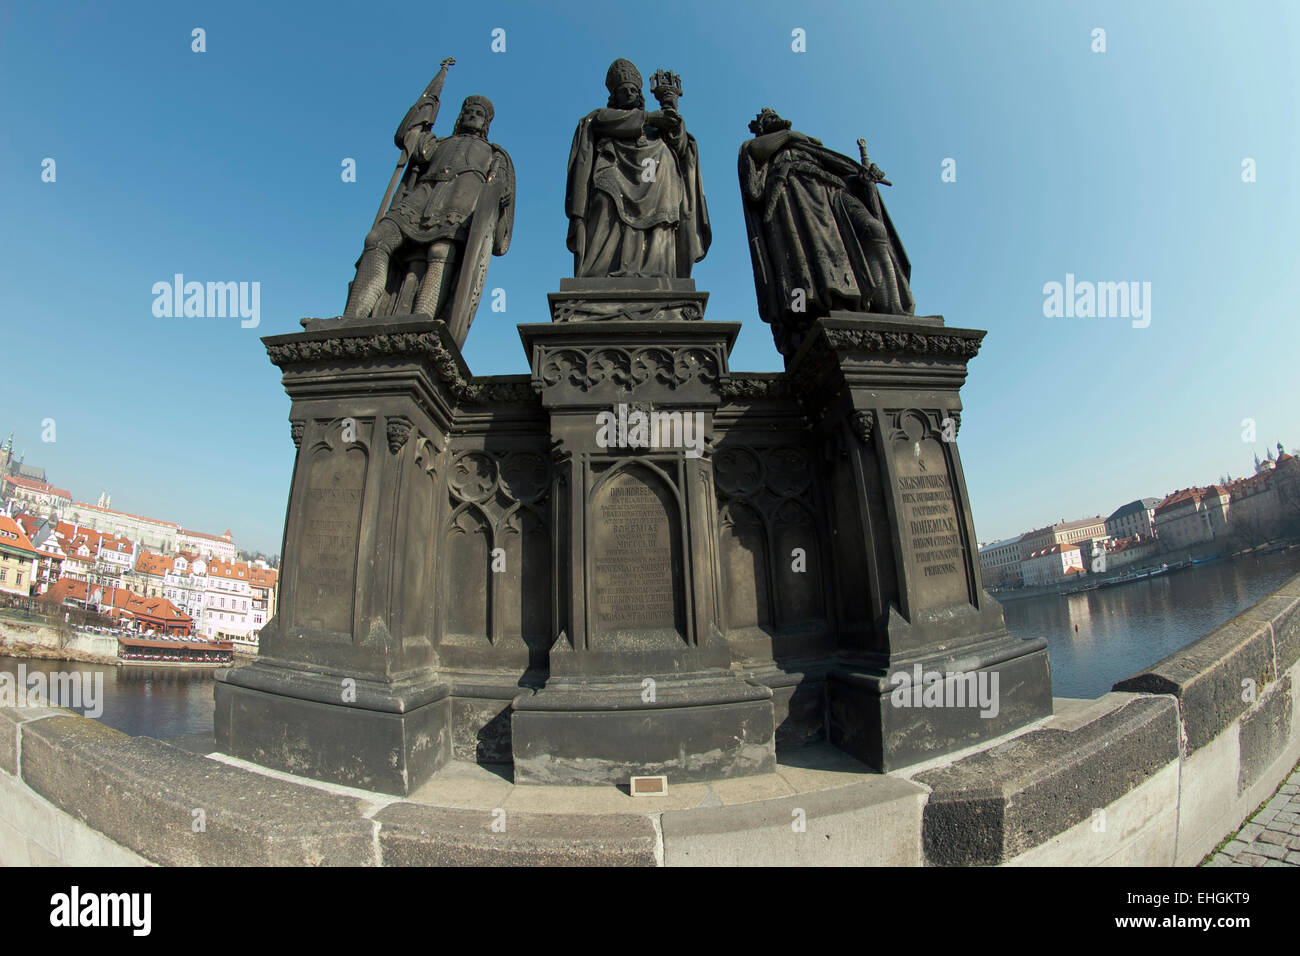 Sculpture from 1853 on Charles bridge - St. Norbert, Wenceslas and Sigismund. Founder Premonstrates - St. Norbert Stock Photo